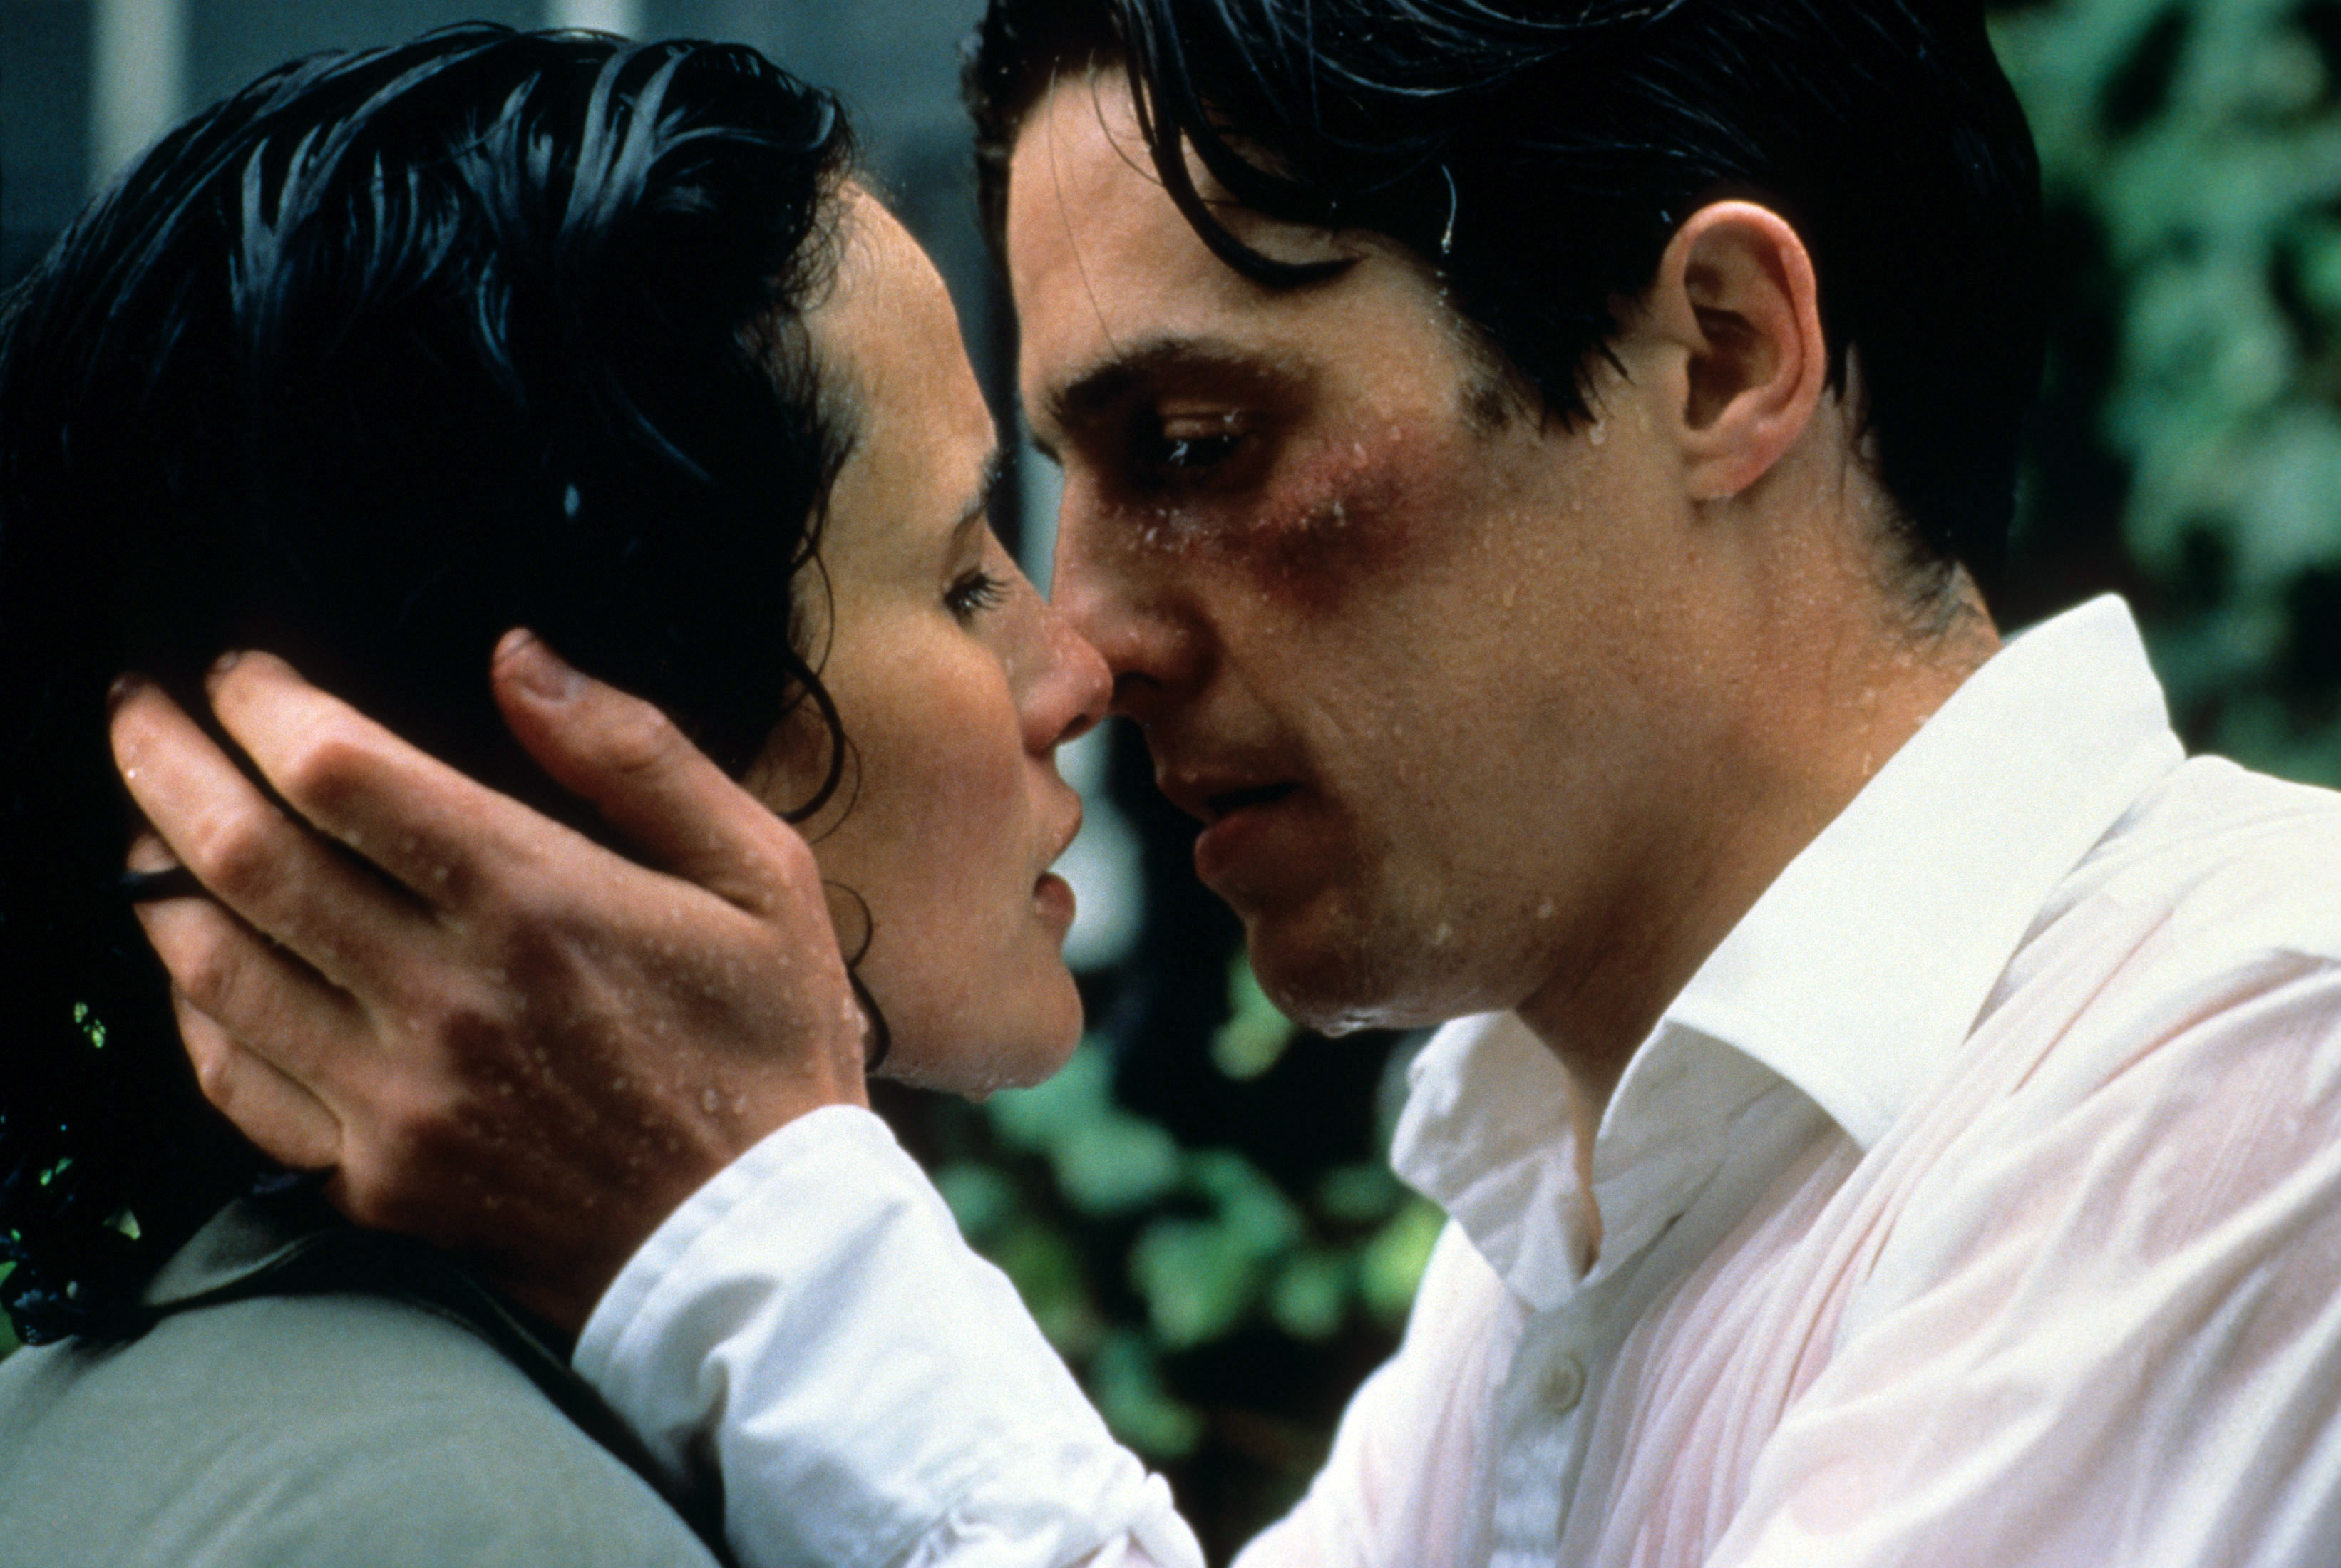 A man and woman are about to kiss, man&#x27;s face shows injury, in an emotionally intense scene